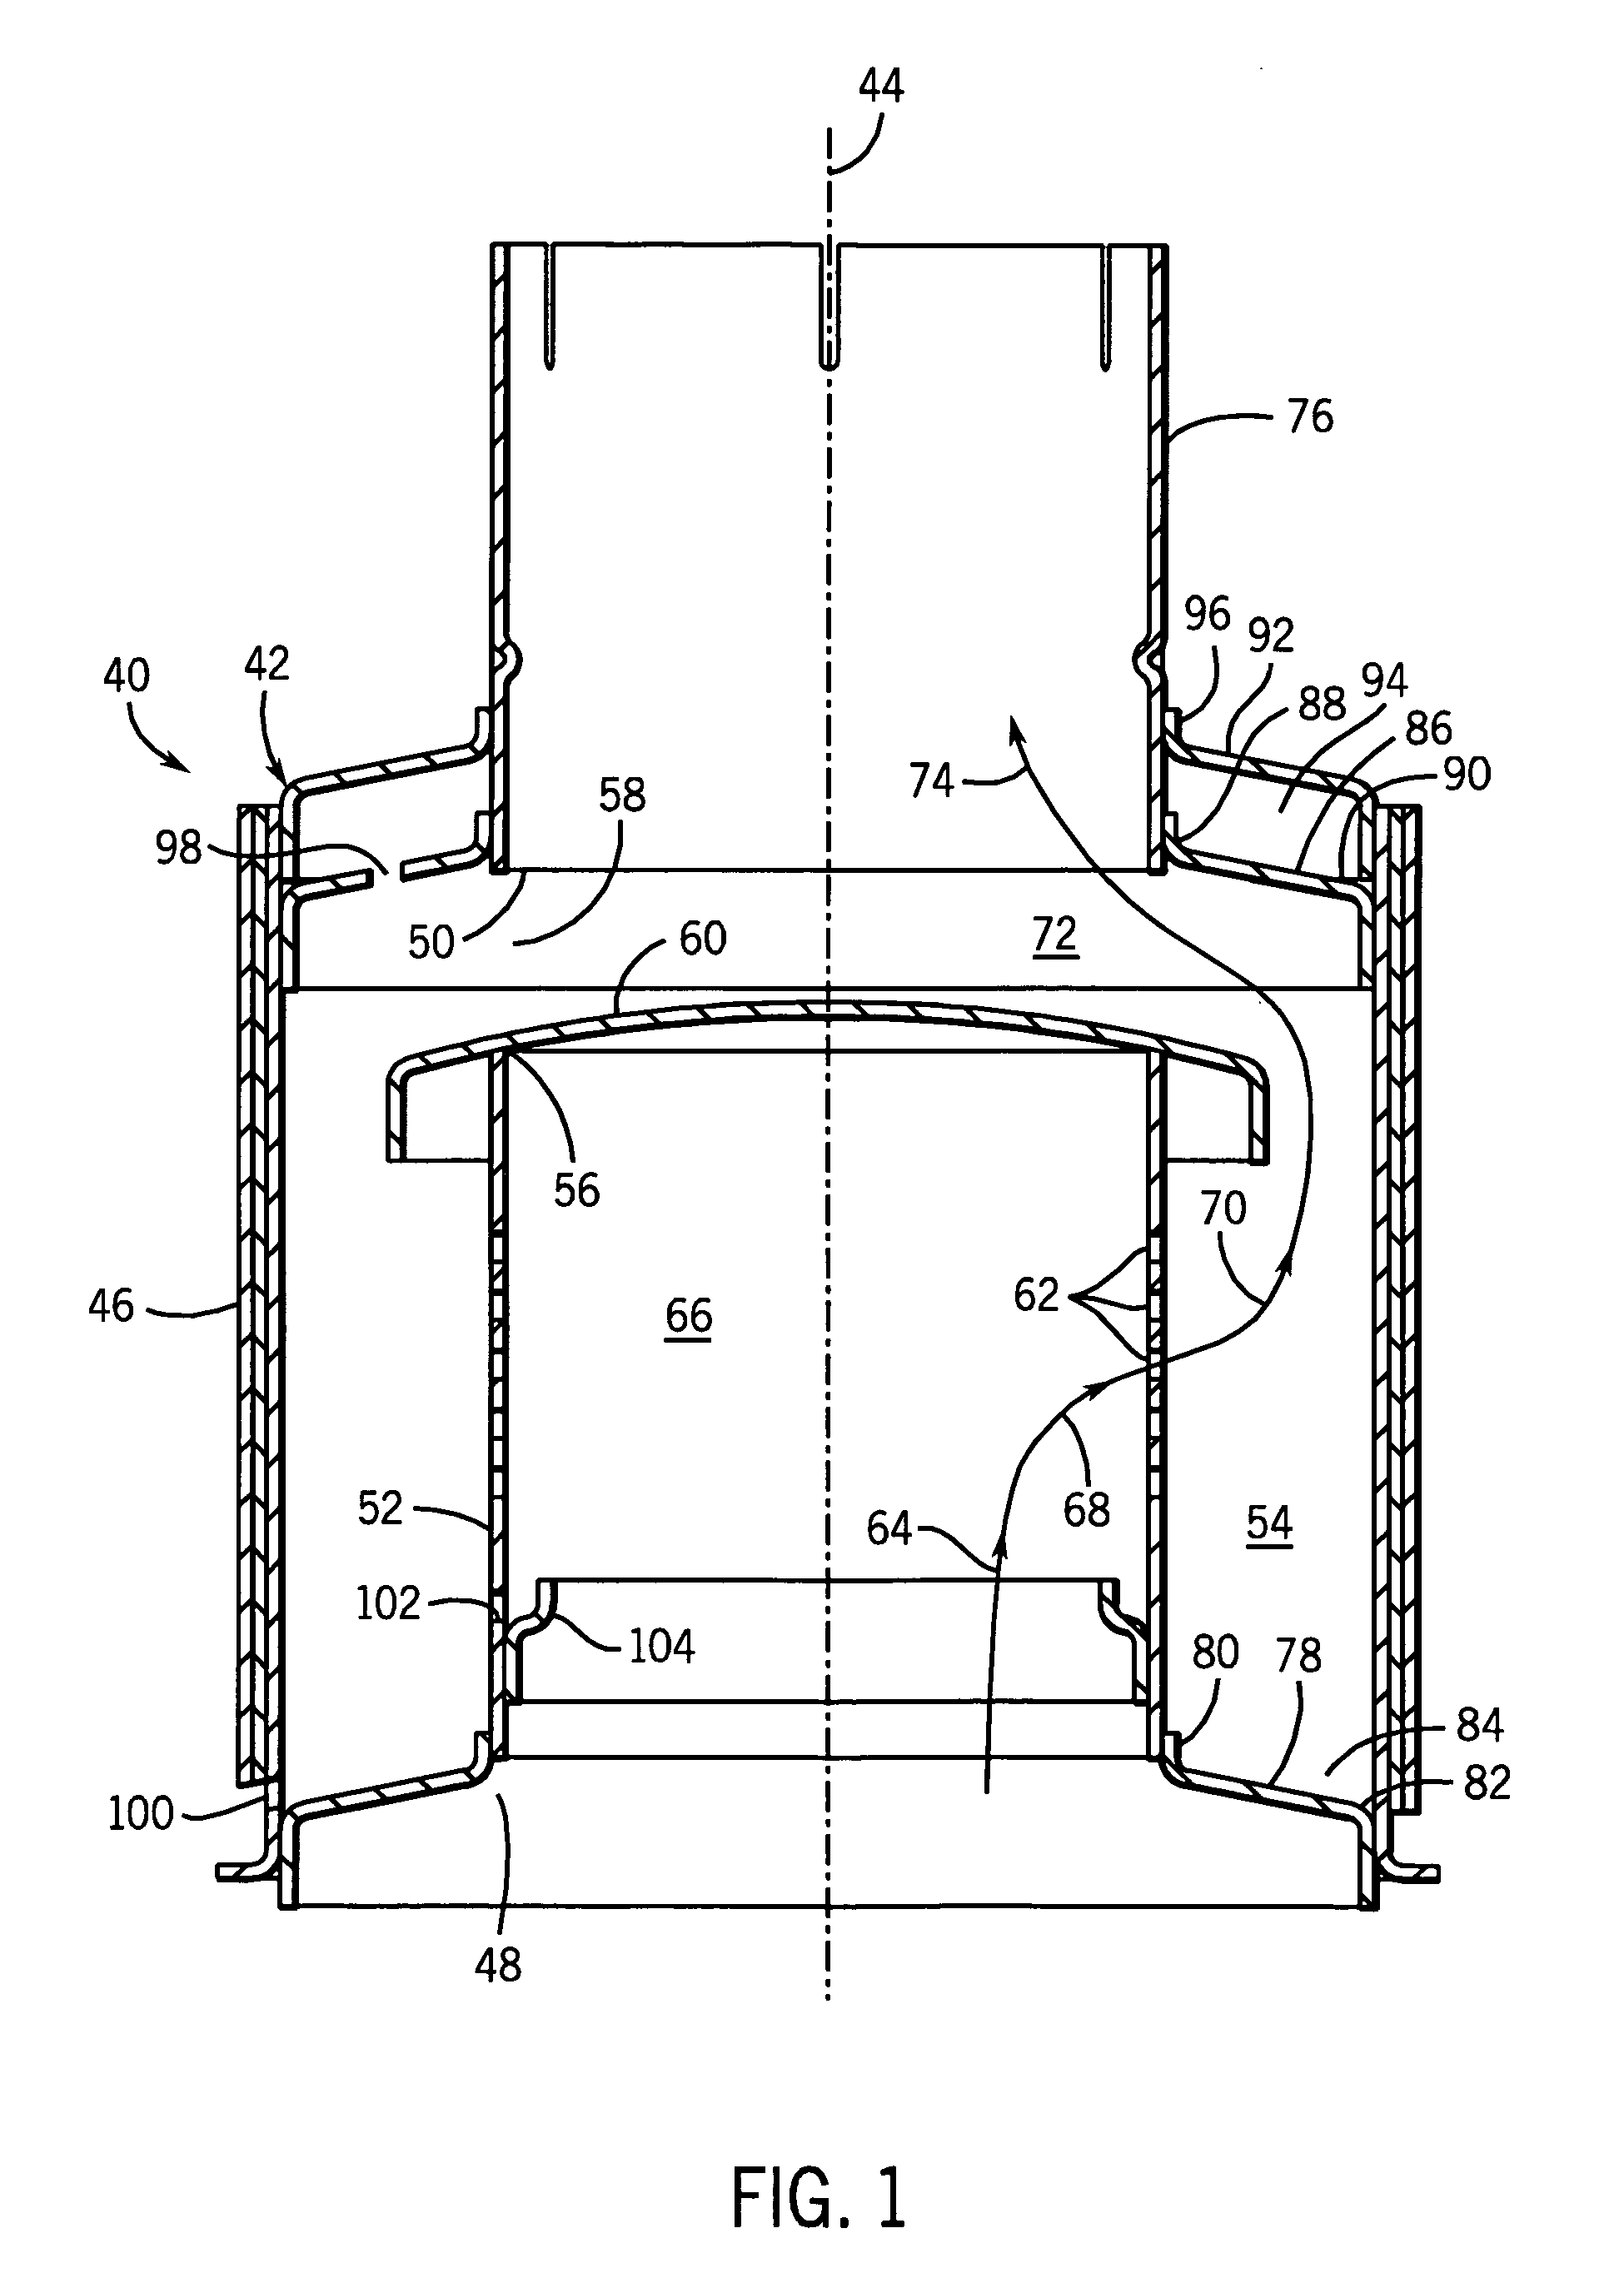 Compact combination exhaust muffler and aftertreatment element and water trap assembly